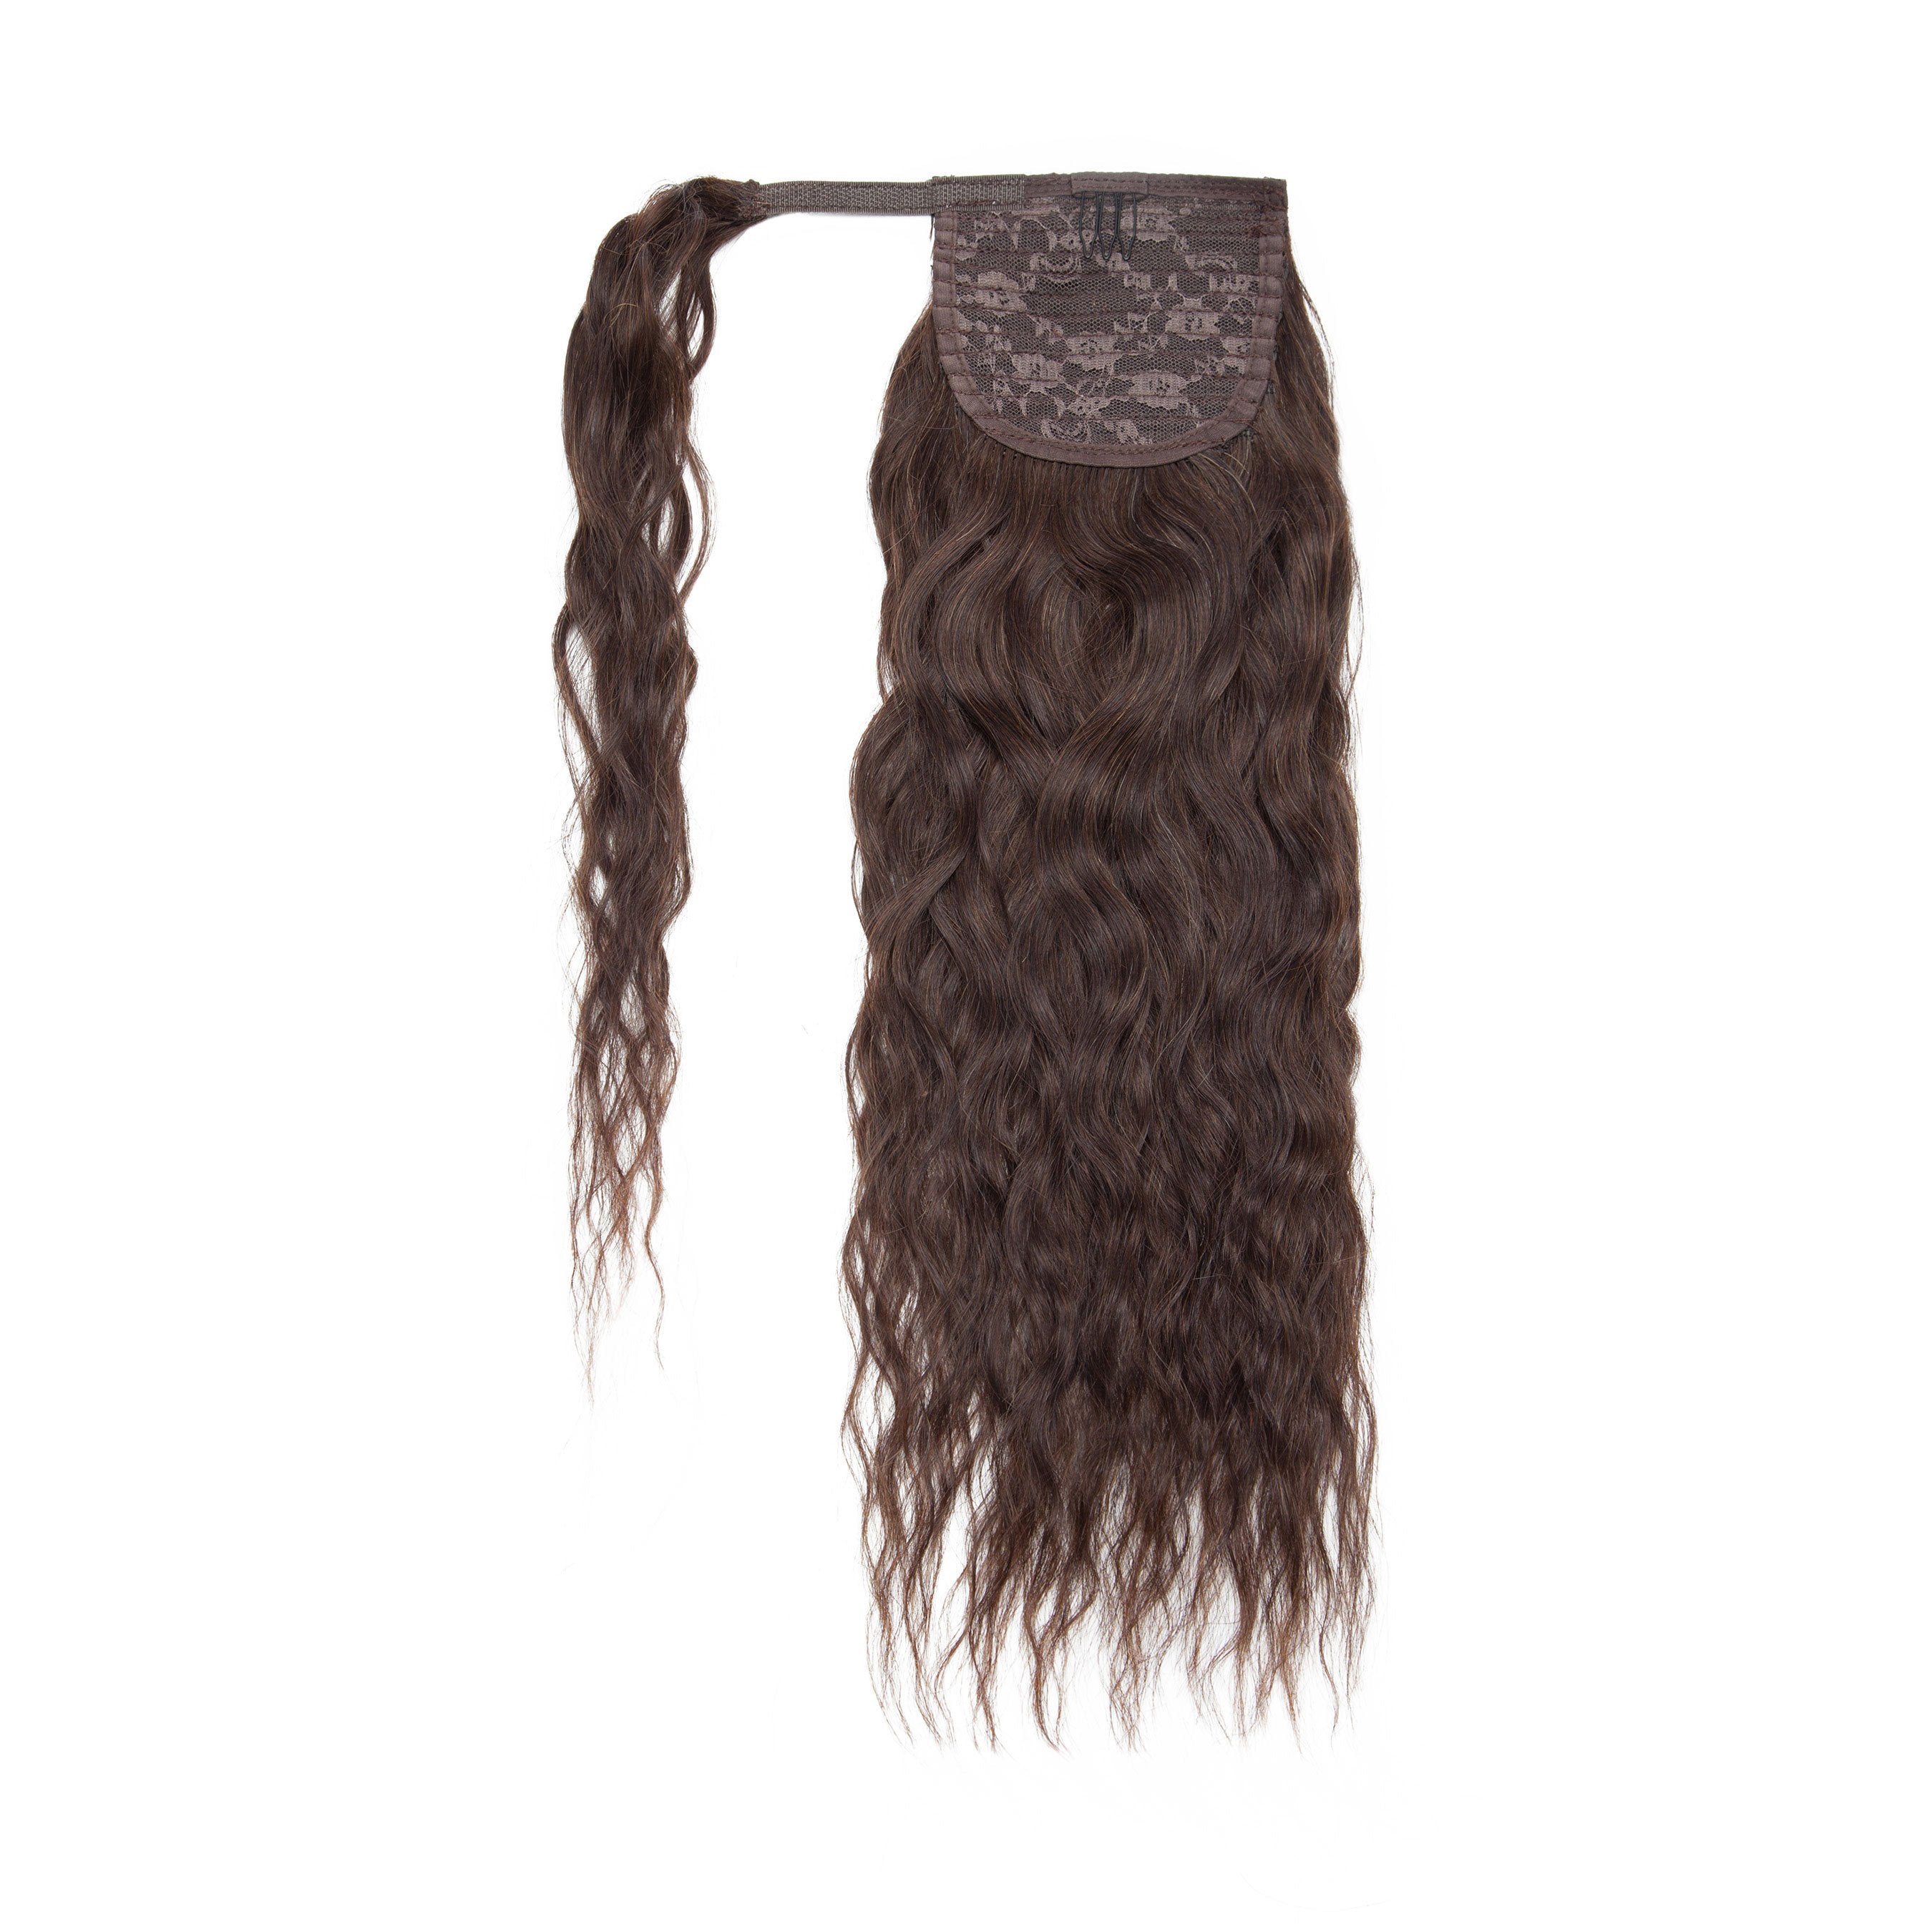 Human Hair Ponytail Extension Clip in Wrap Around Remy Human Hair Extension